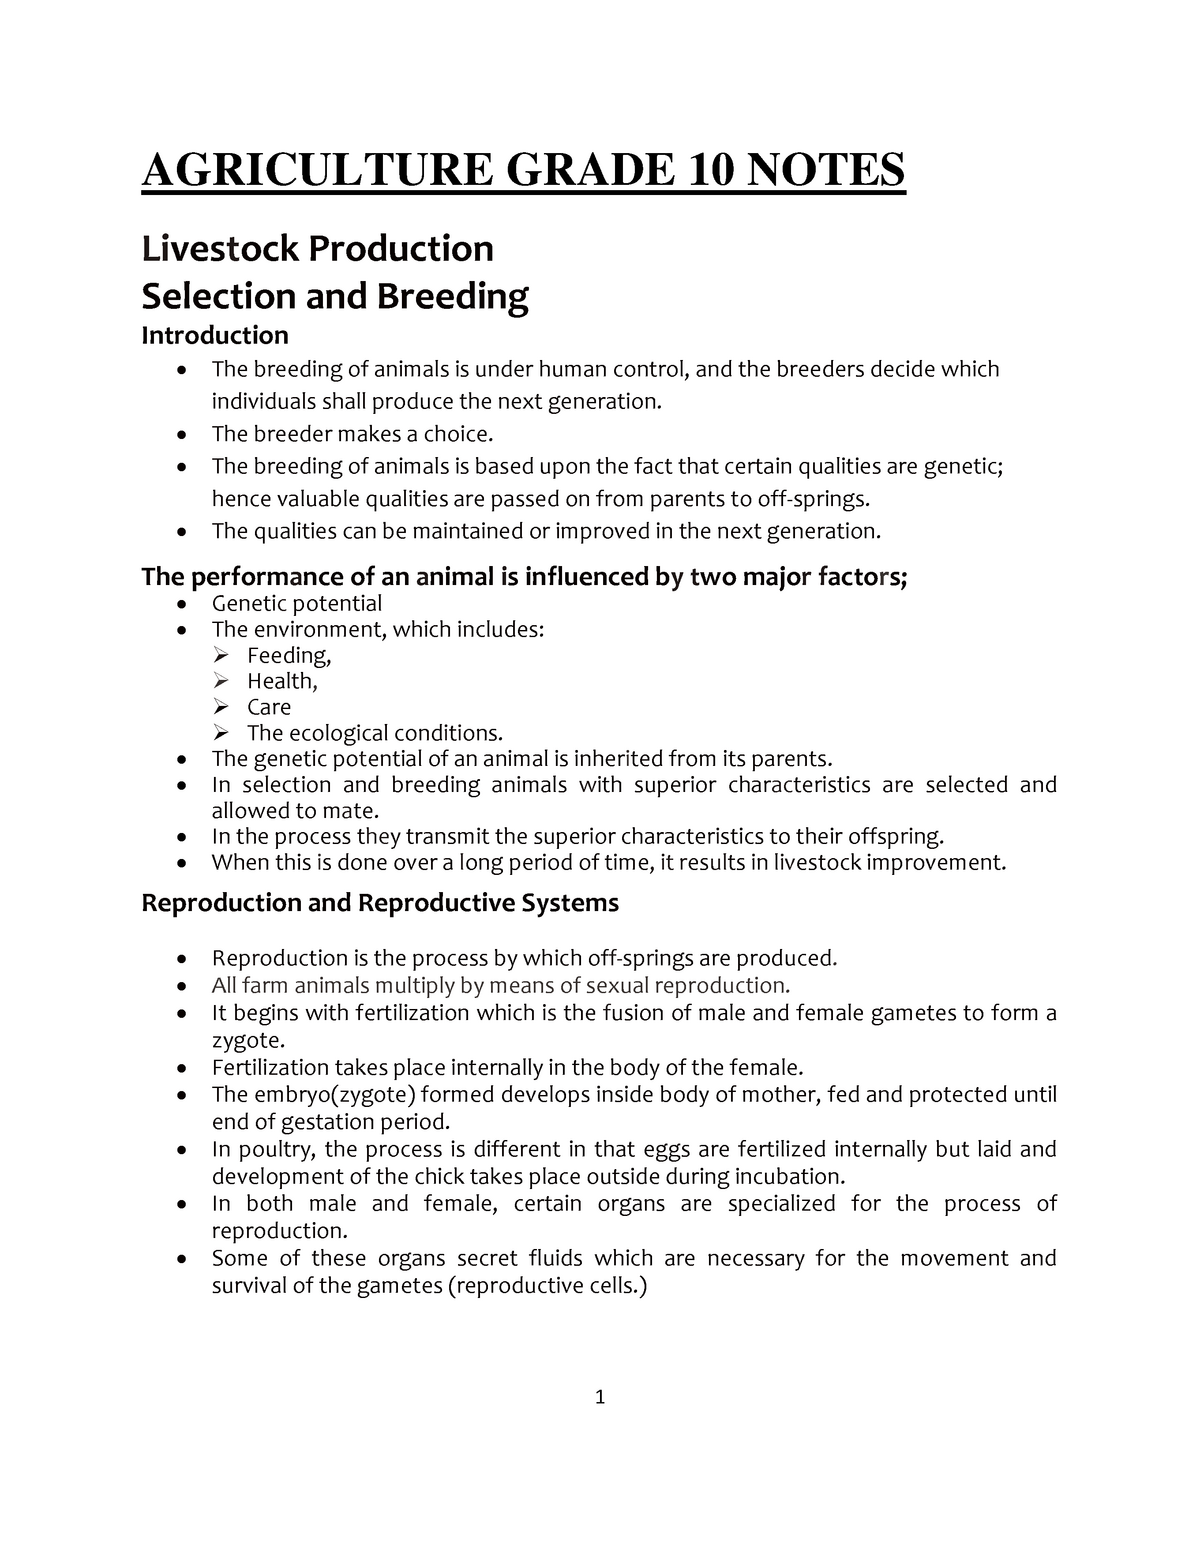 example of term paper in agriculture